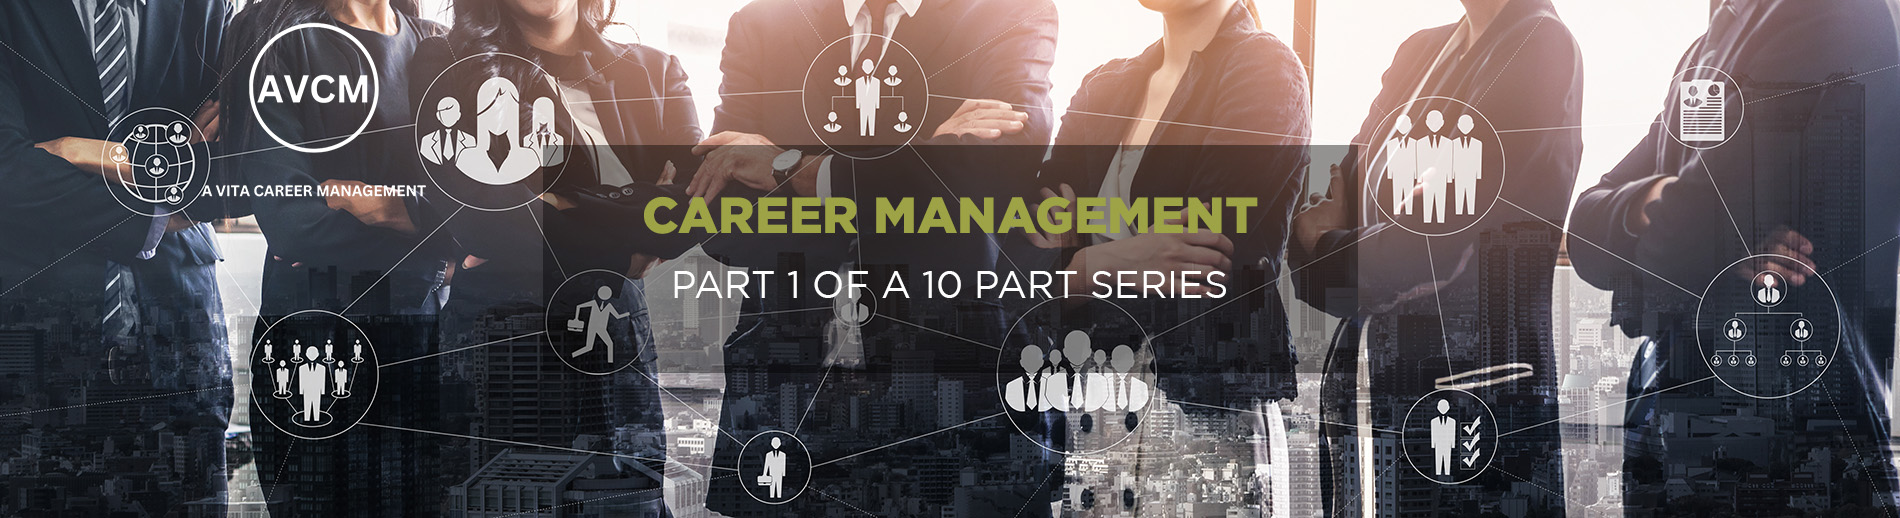 Blog1 - Career Management: Identify Your Career Goals With A Career Development Plan